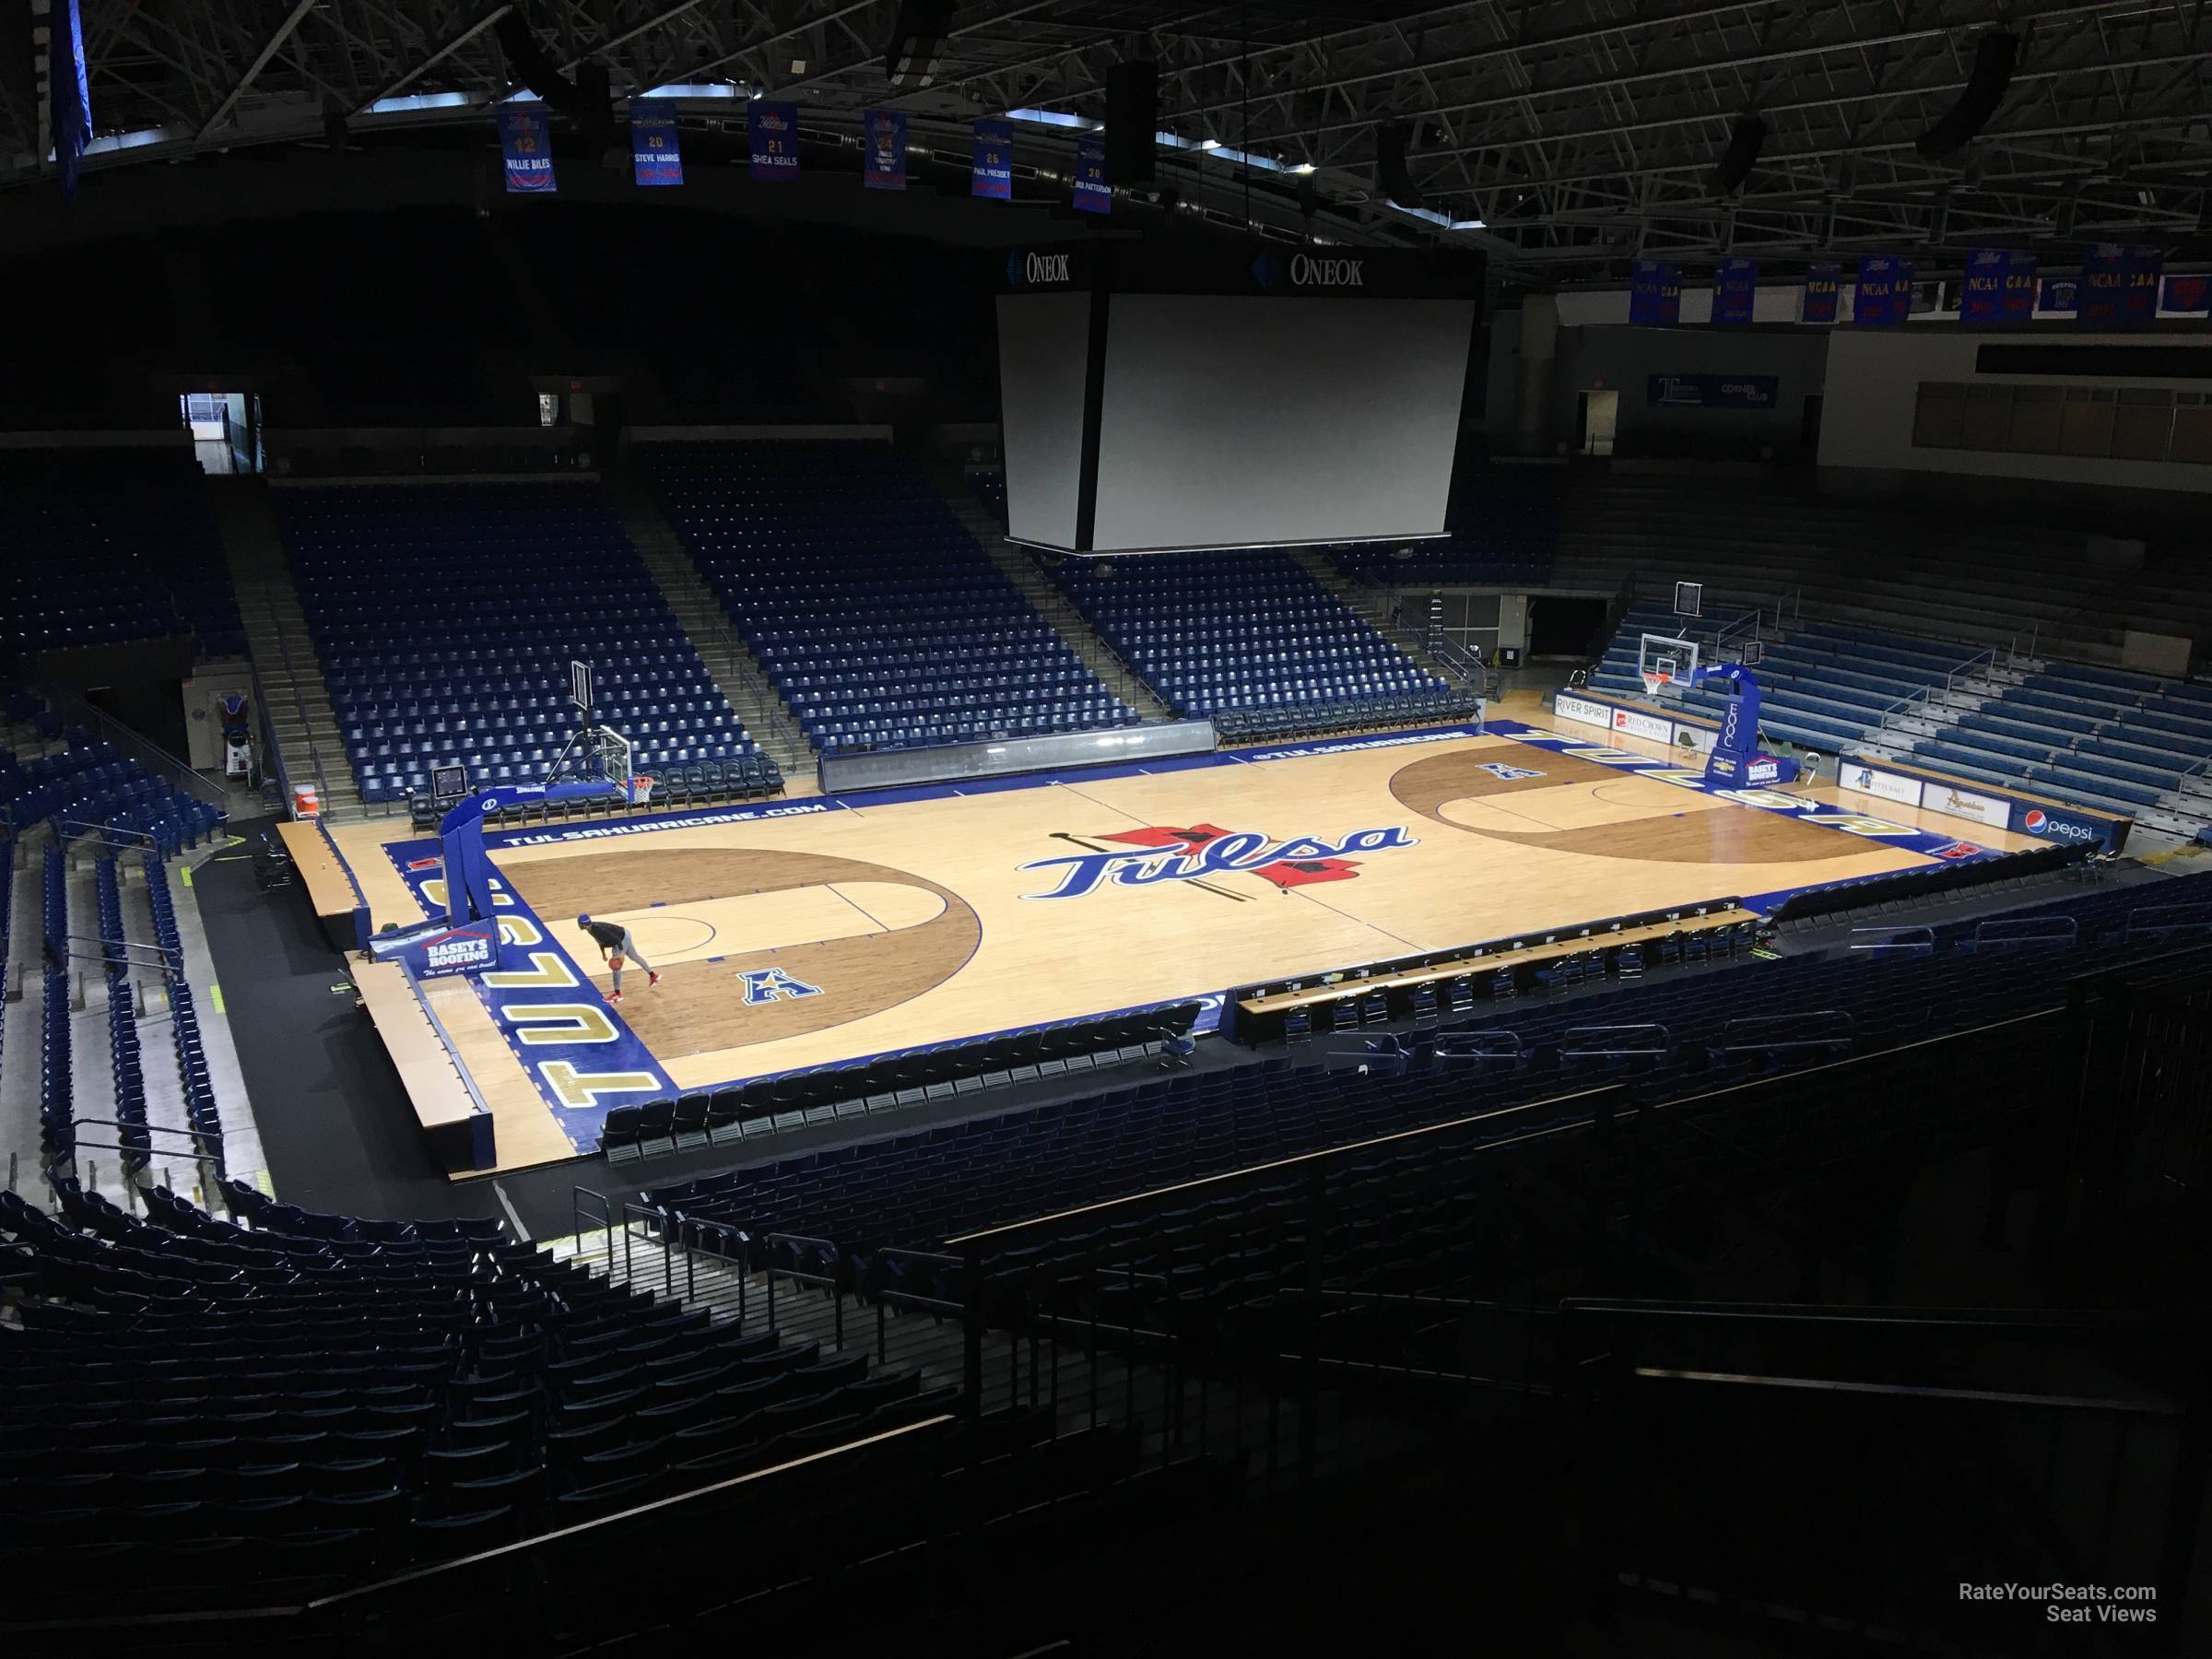 section 216, row d seat view  - reynolds center